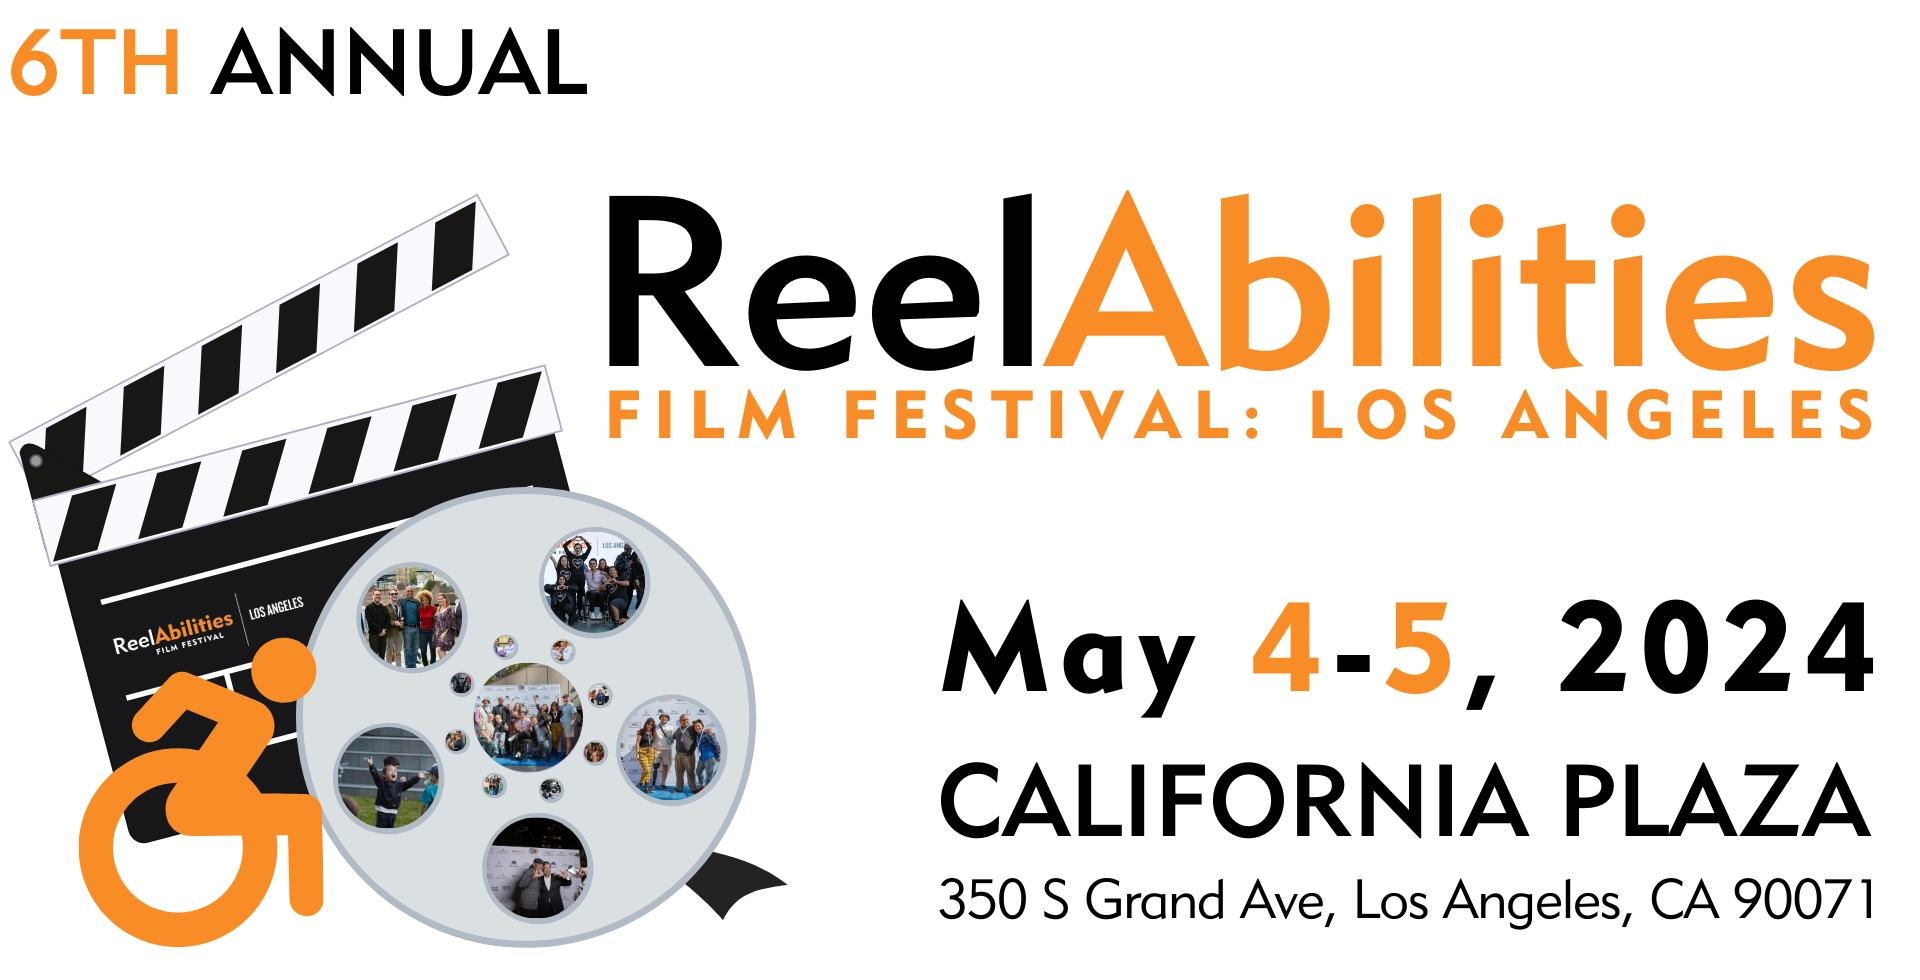 Banner for 6th Annual ReelAbilities Film Festival Los Angeles May 4 5 2024 California Plaza